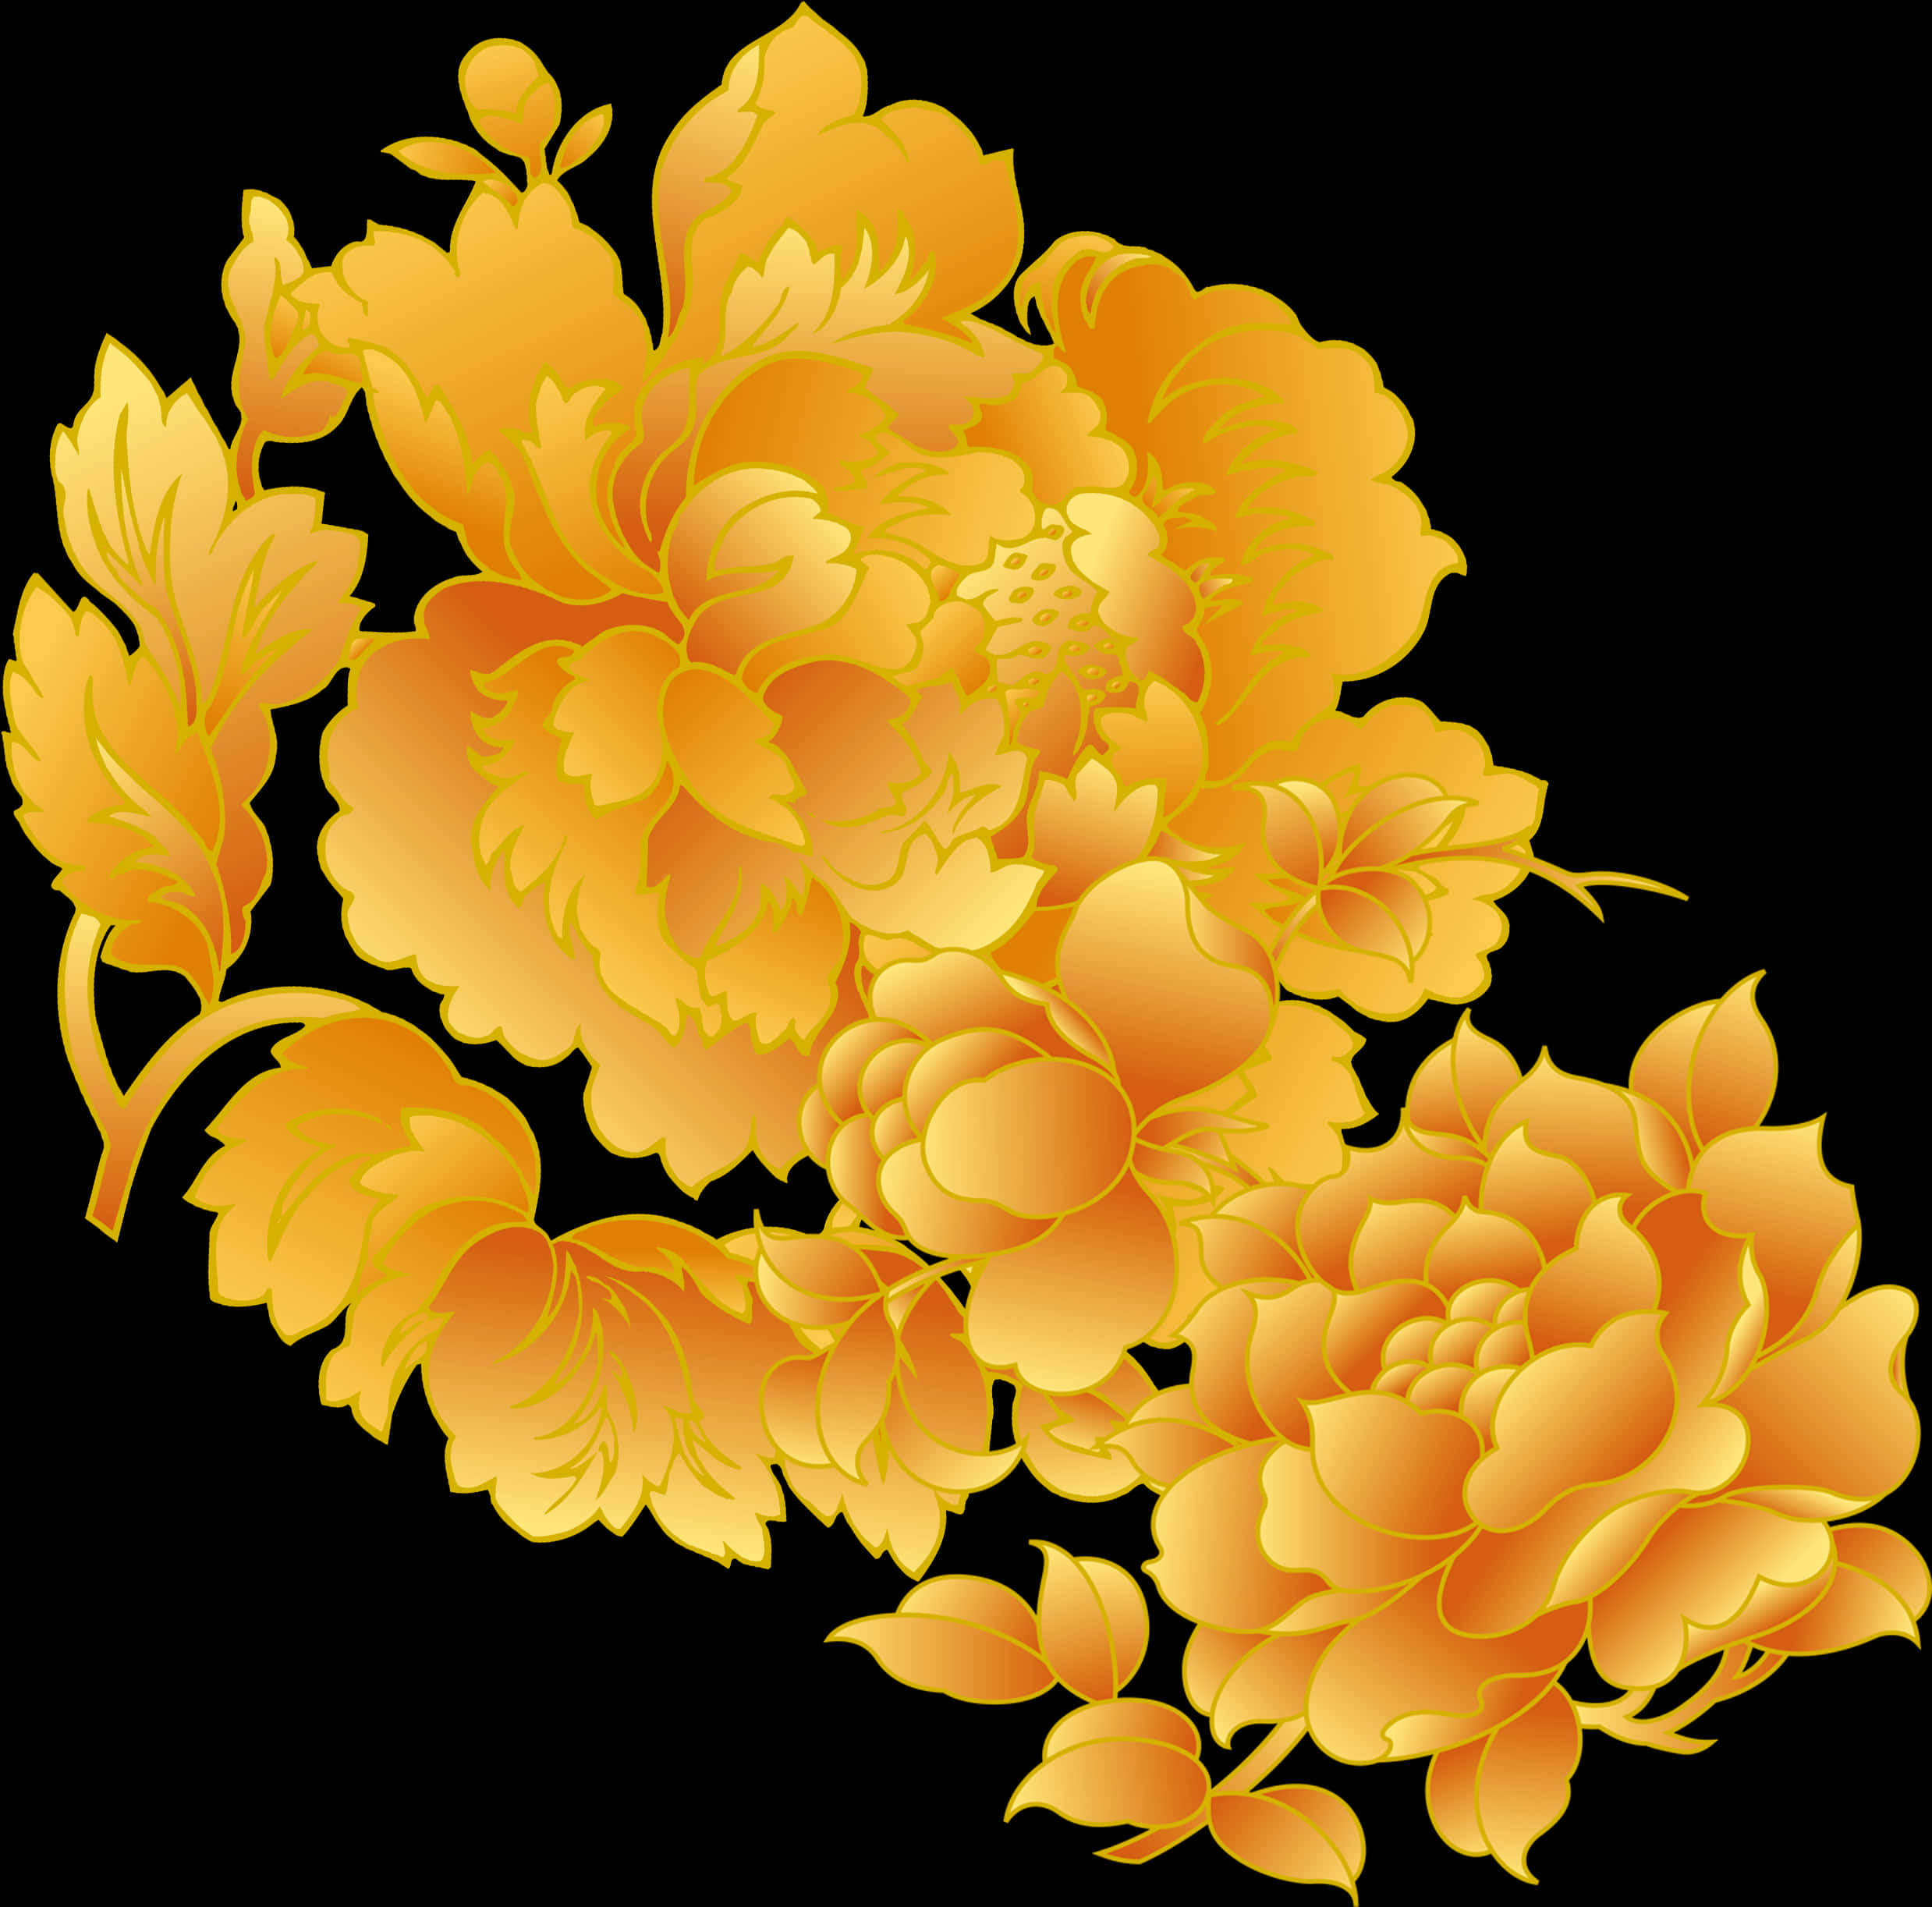 A Gold Flowers On A Black Background